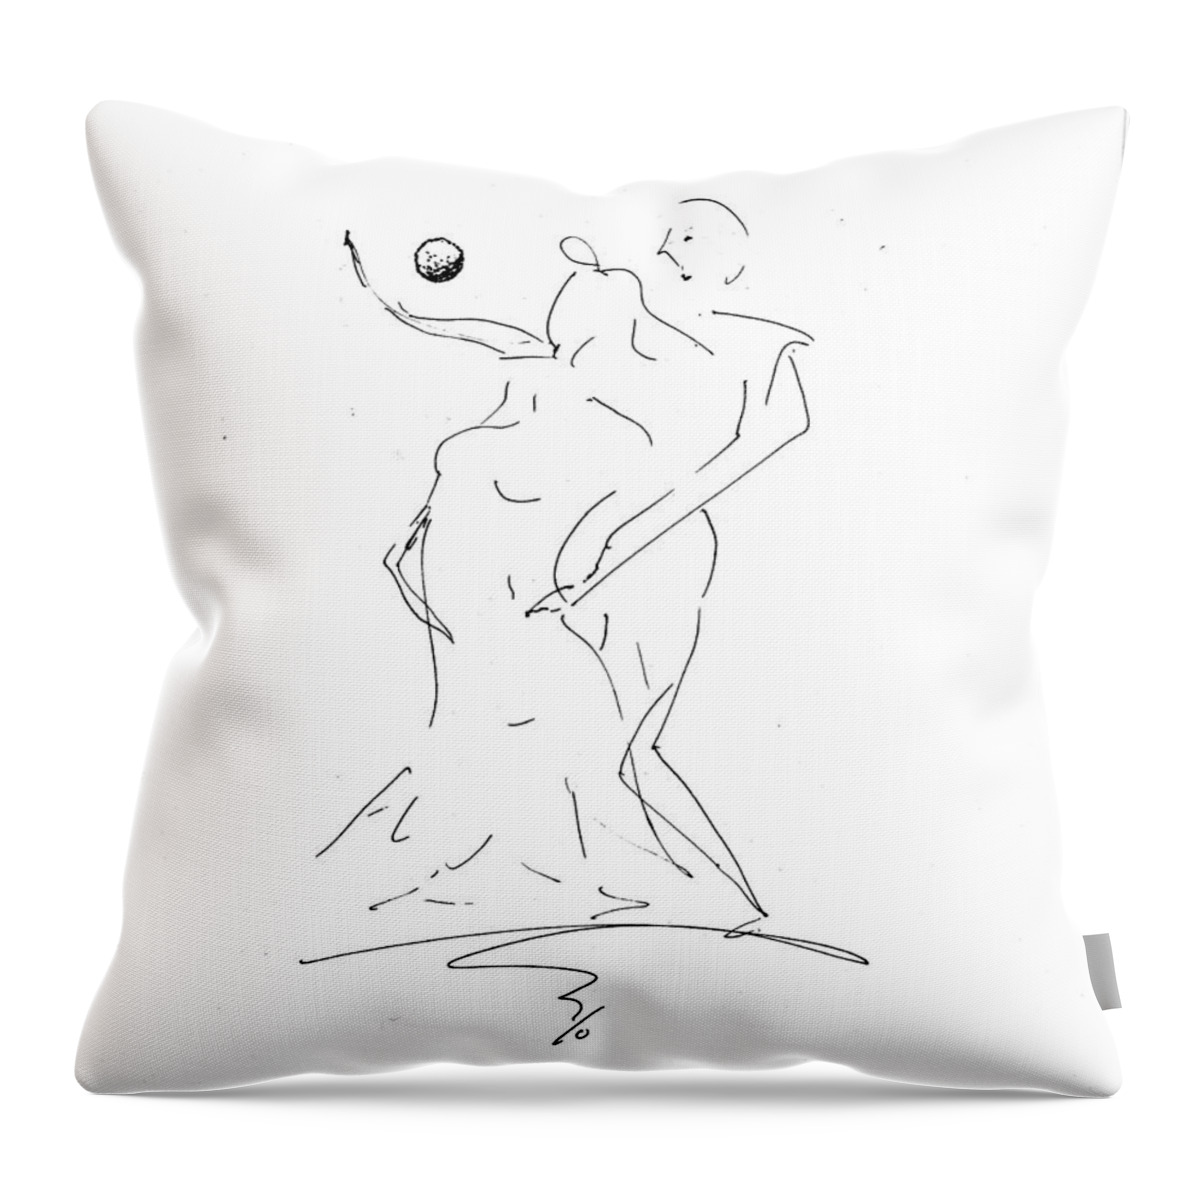  Throw Pillow featuring the drawing Tri - Tango by Raymond Fernandez